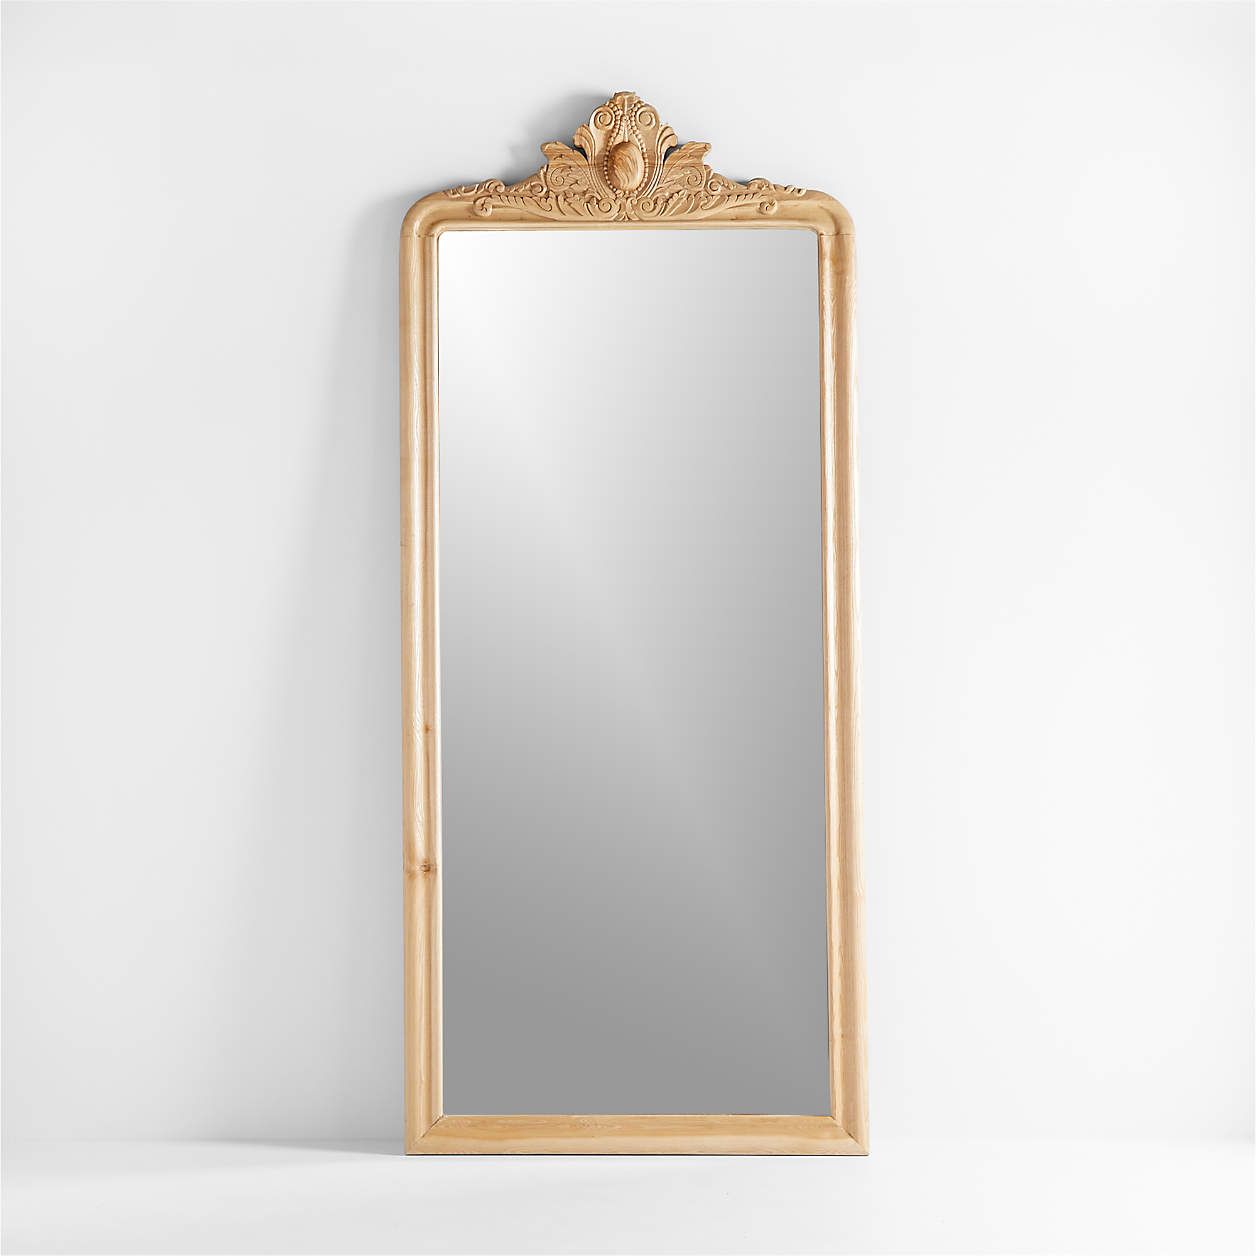 Levon Carved Wood Floor Mirror by Leanne Ford + Reviews | Crate & Barrel | Crate & Barrel